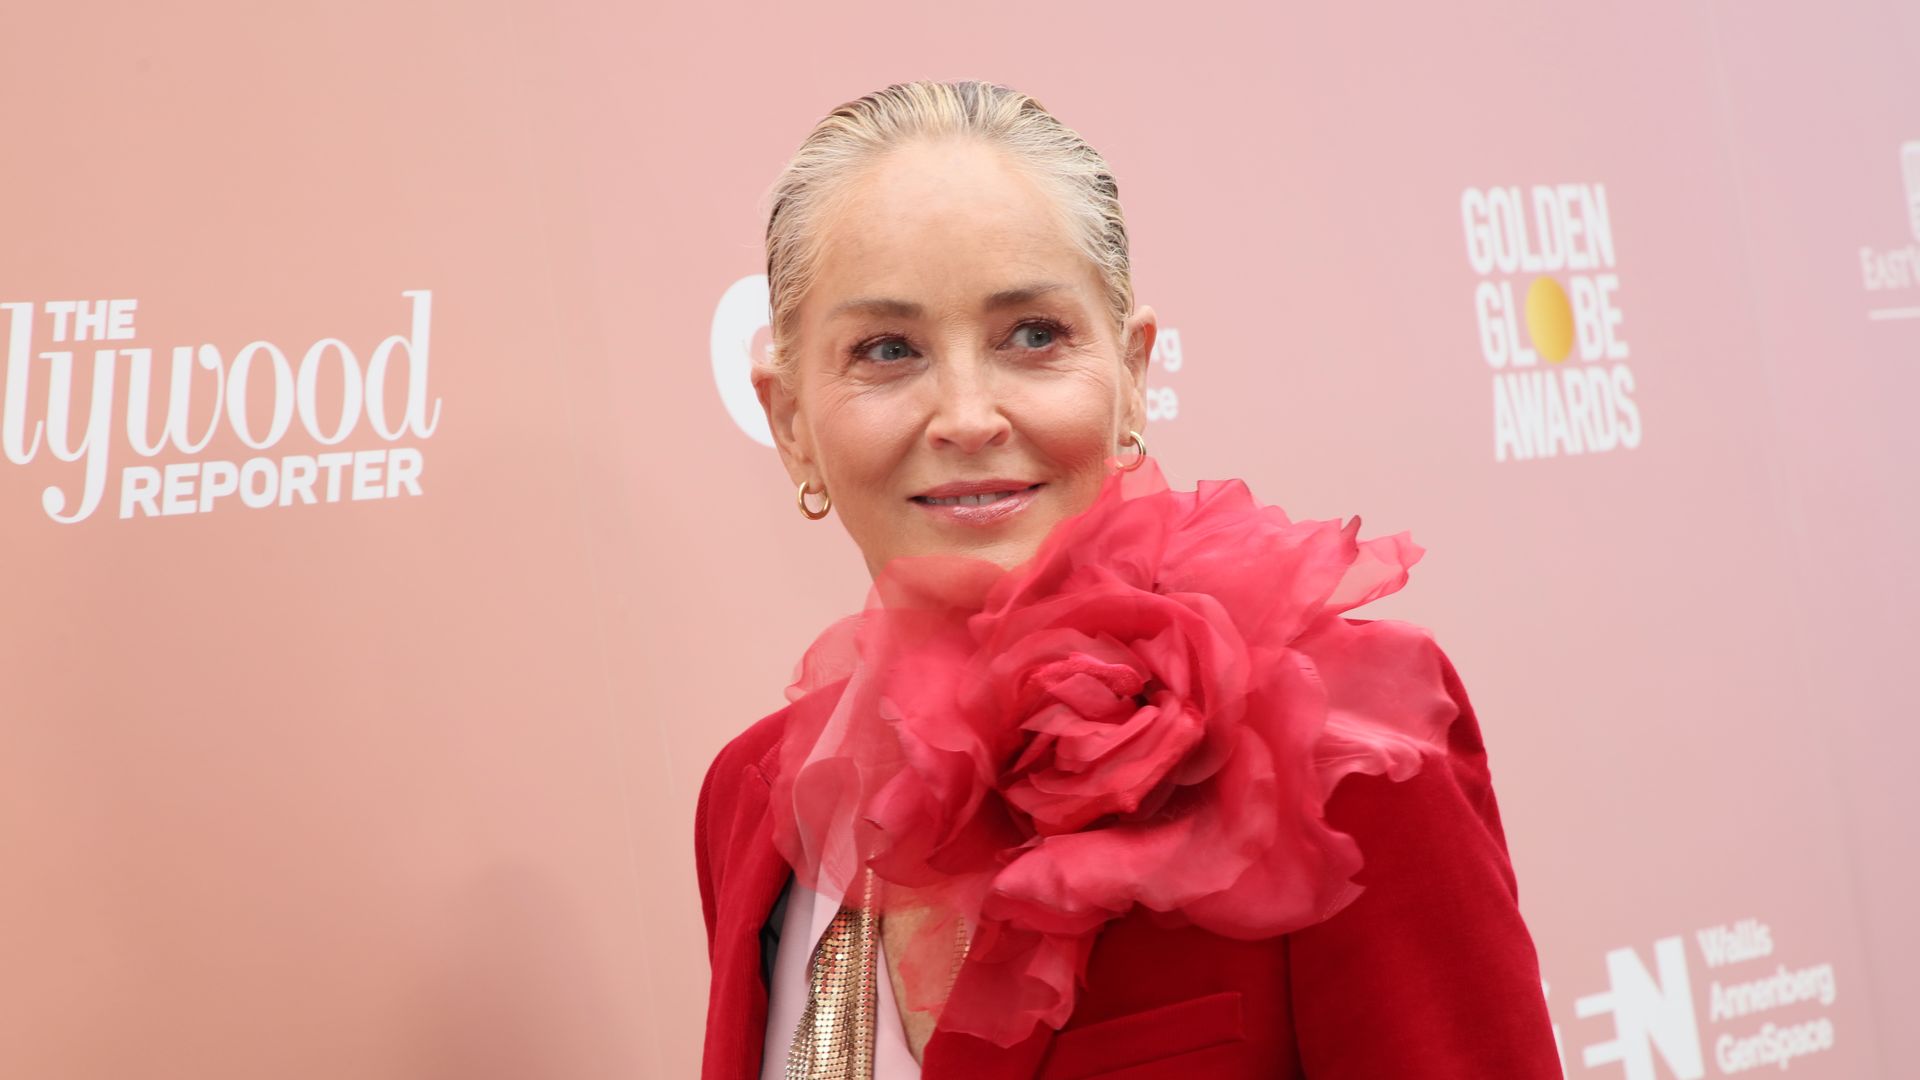 Sharon Stone attends The Hollywood Reporter 2nd Annual "Raising Our Voices" event at Audrey Irmas Pavilion on May 31, 2023 in Los Angeles, California